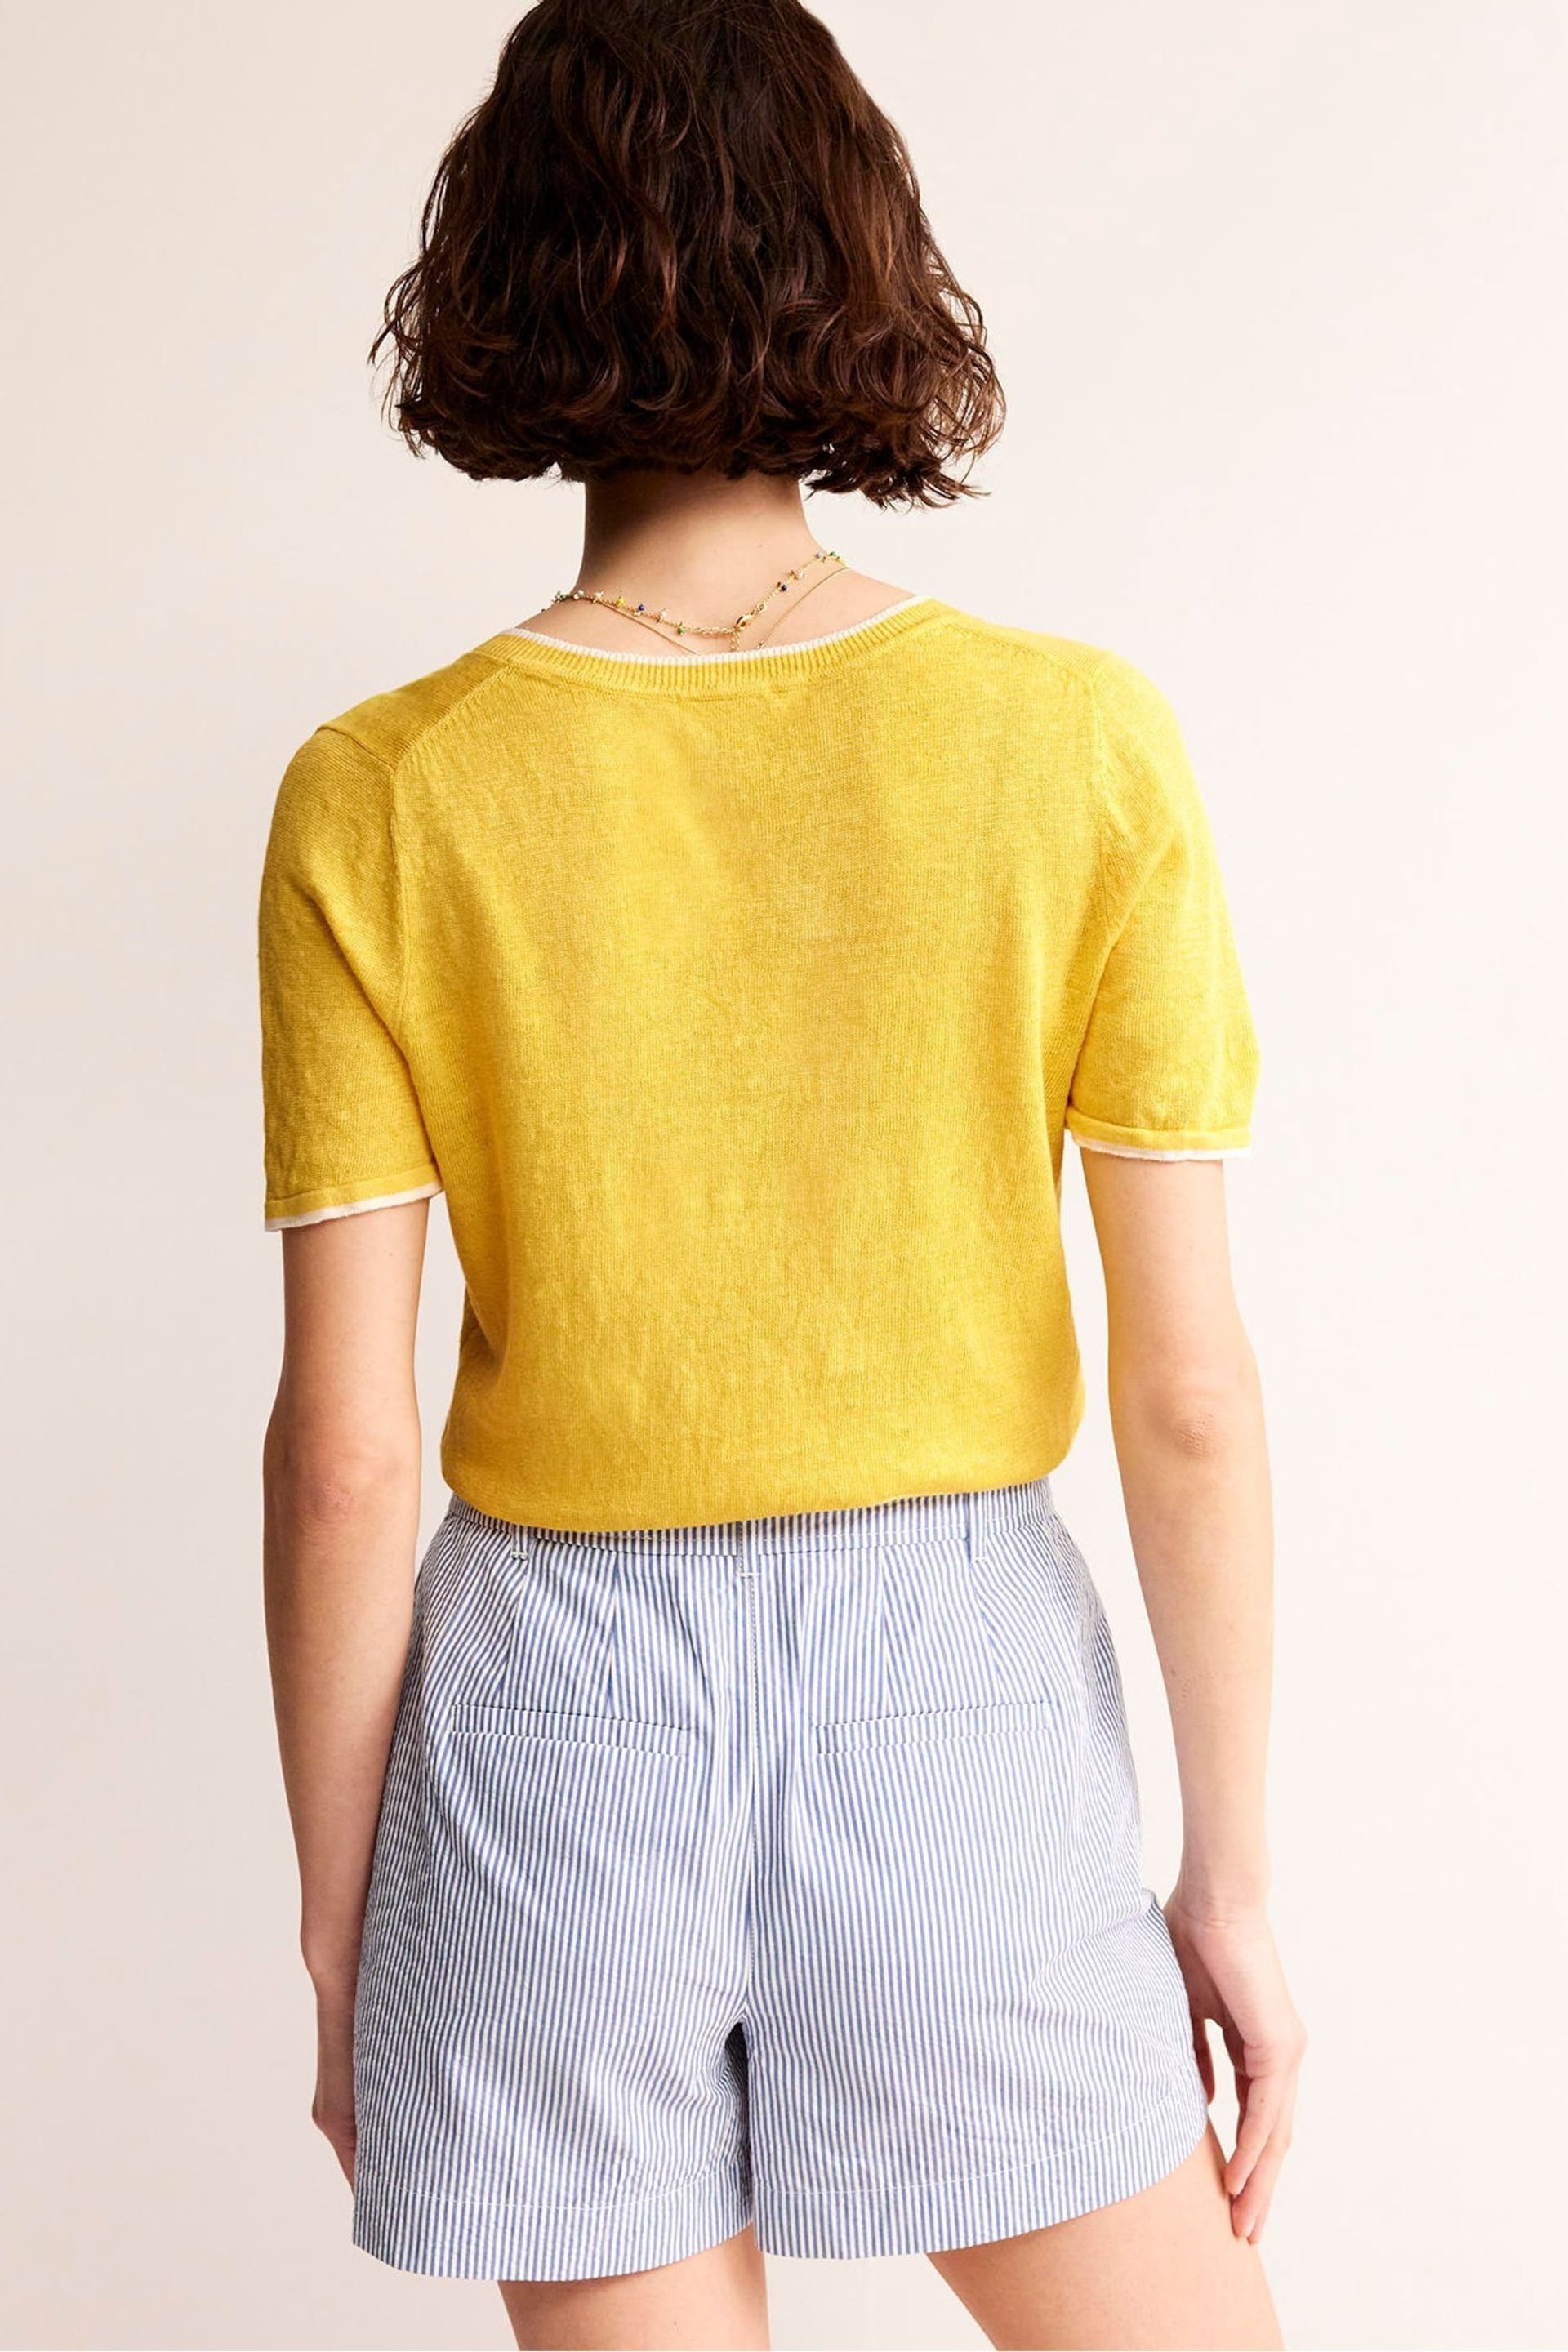 Boden Yellow Maggie V-Neck Linen Cardigan - Image 2 of 6